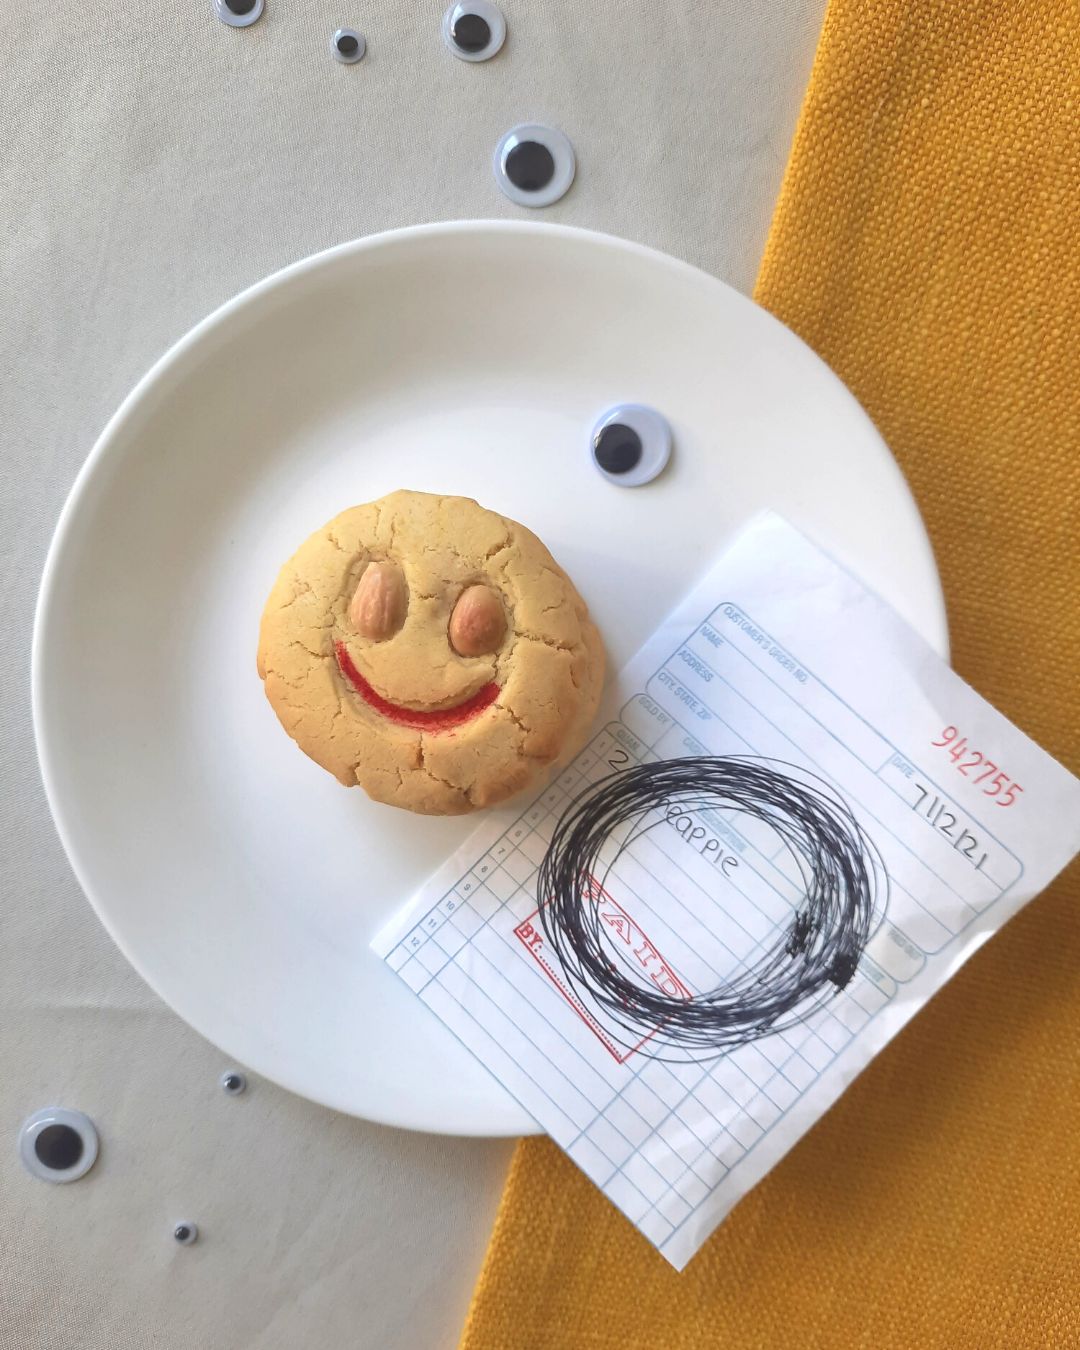 A smiley faced almond cookie with red lips on a plate. Next to the cookie is a receipt with a wild circle drawn in the middle. The foreground has different sizes of googly eyes.